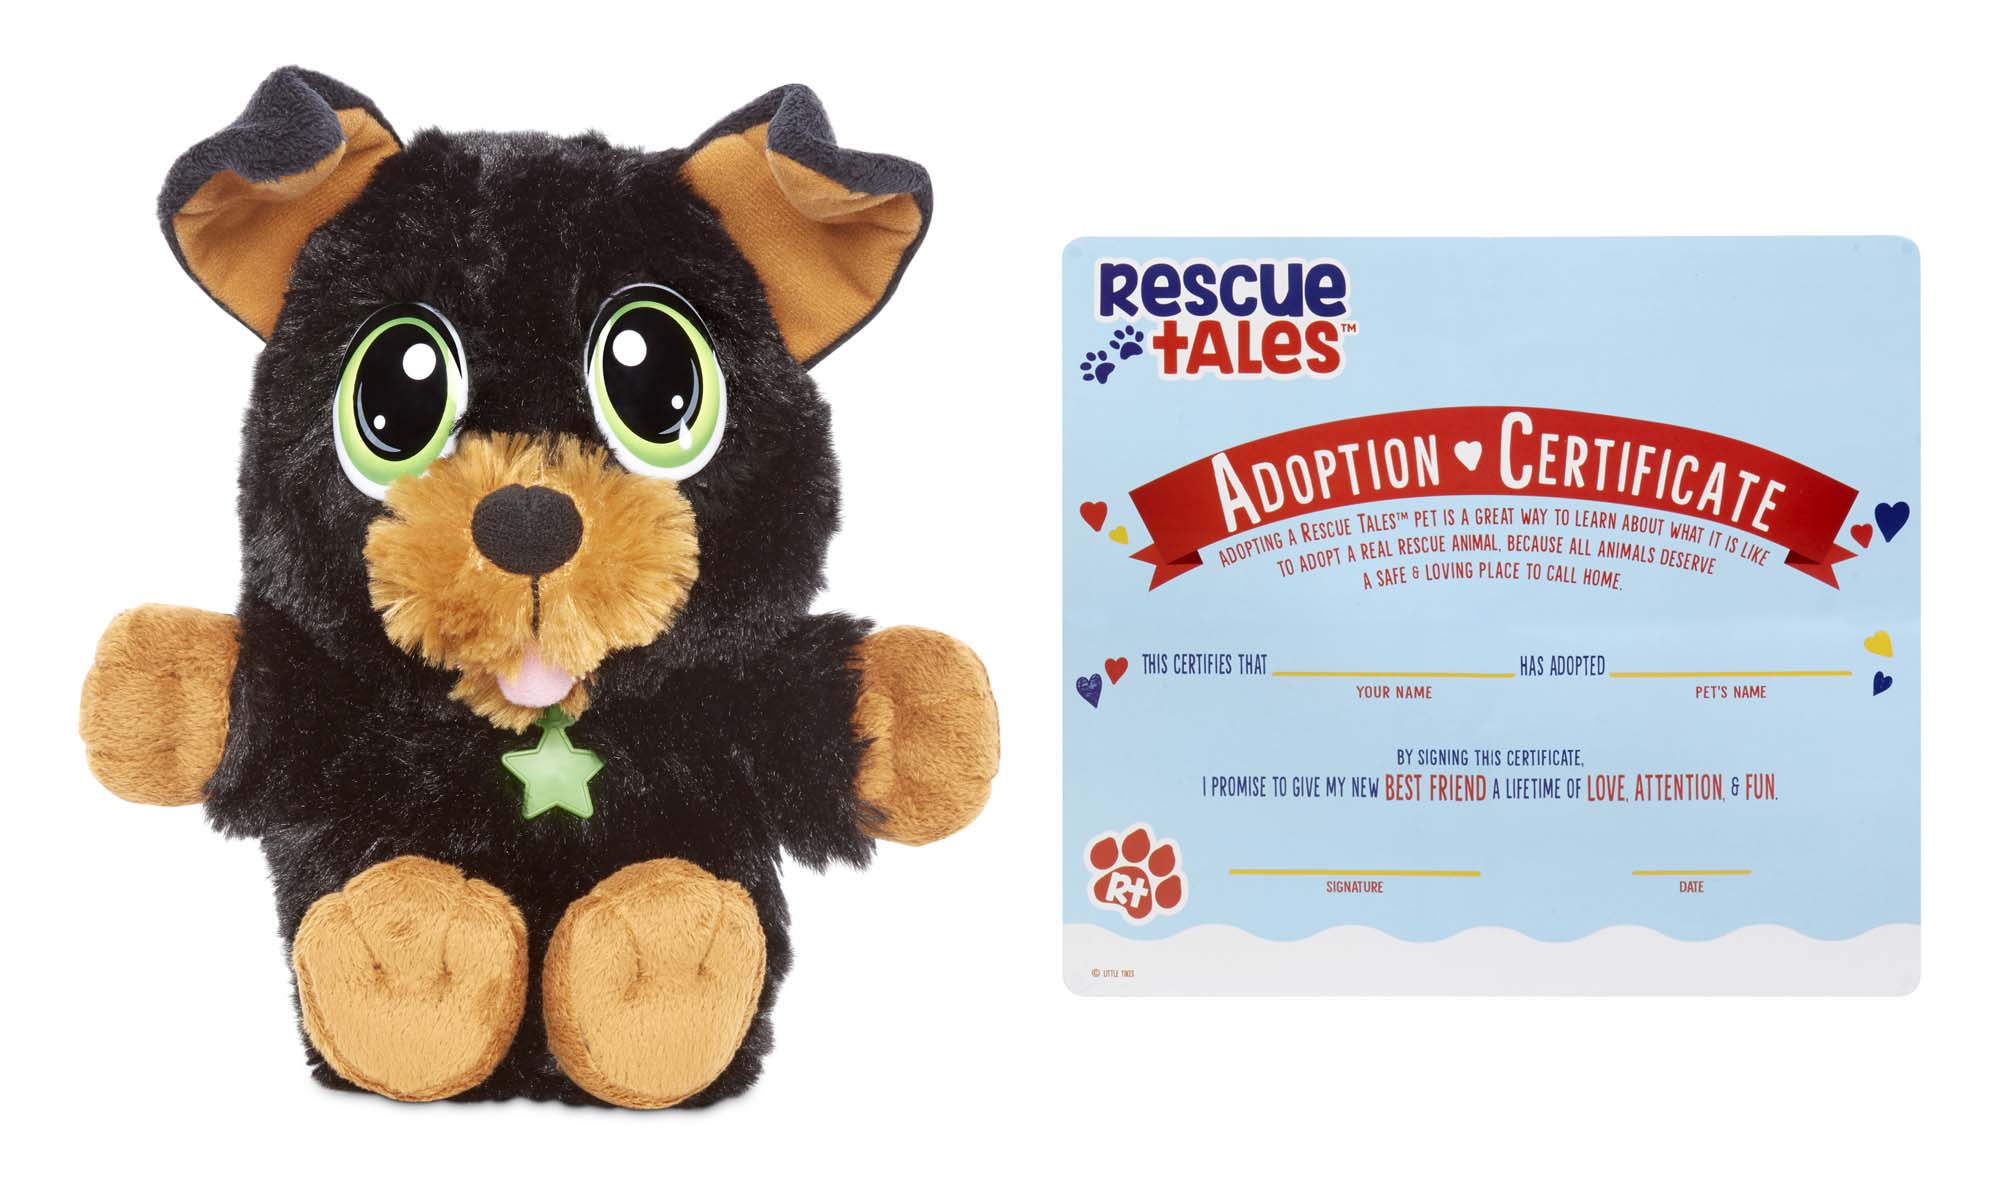 Rescue Tales Cuddly Pup Yorkie Soft Plush Pet Toy - image 3 of 7